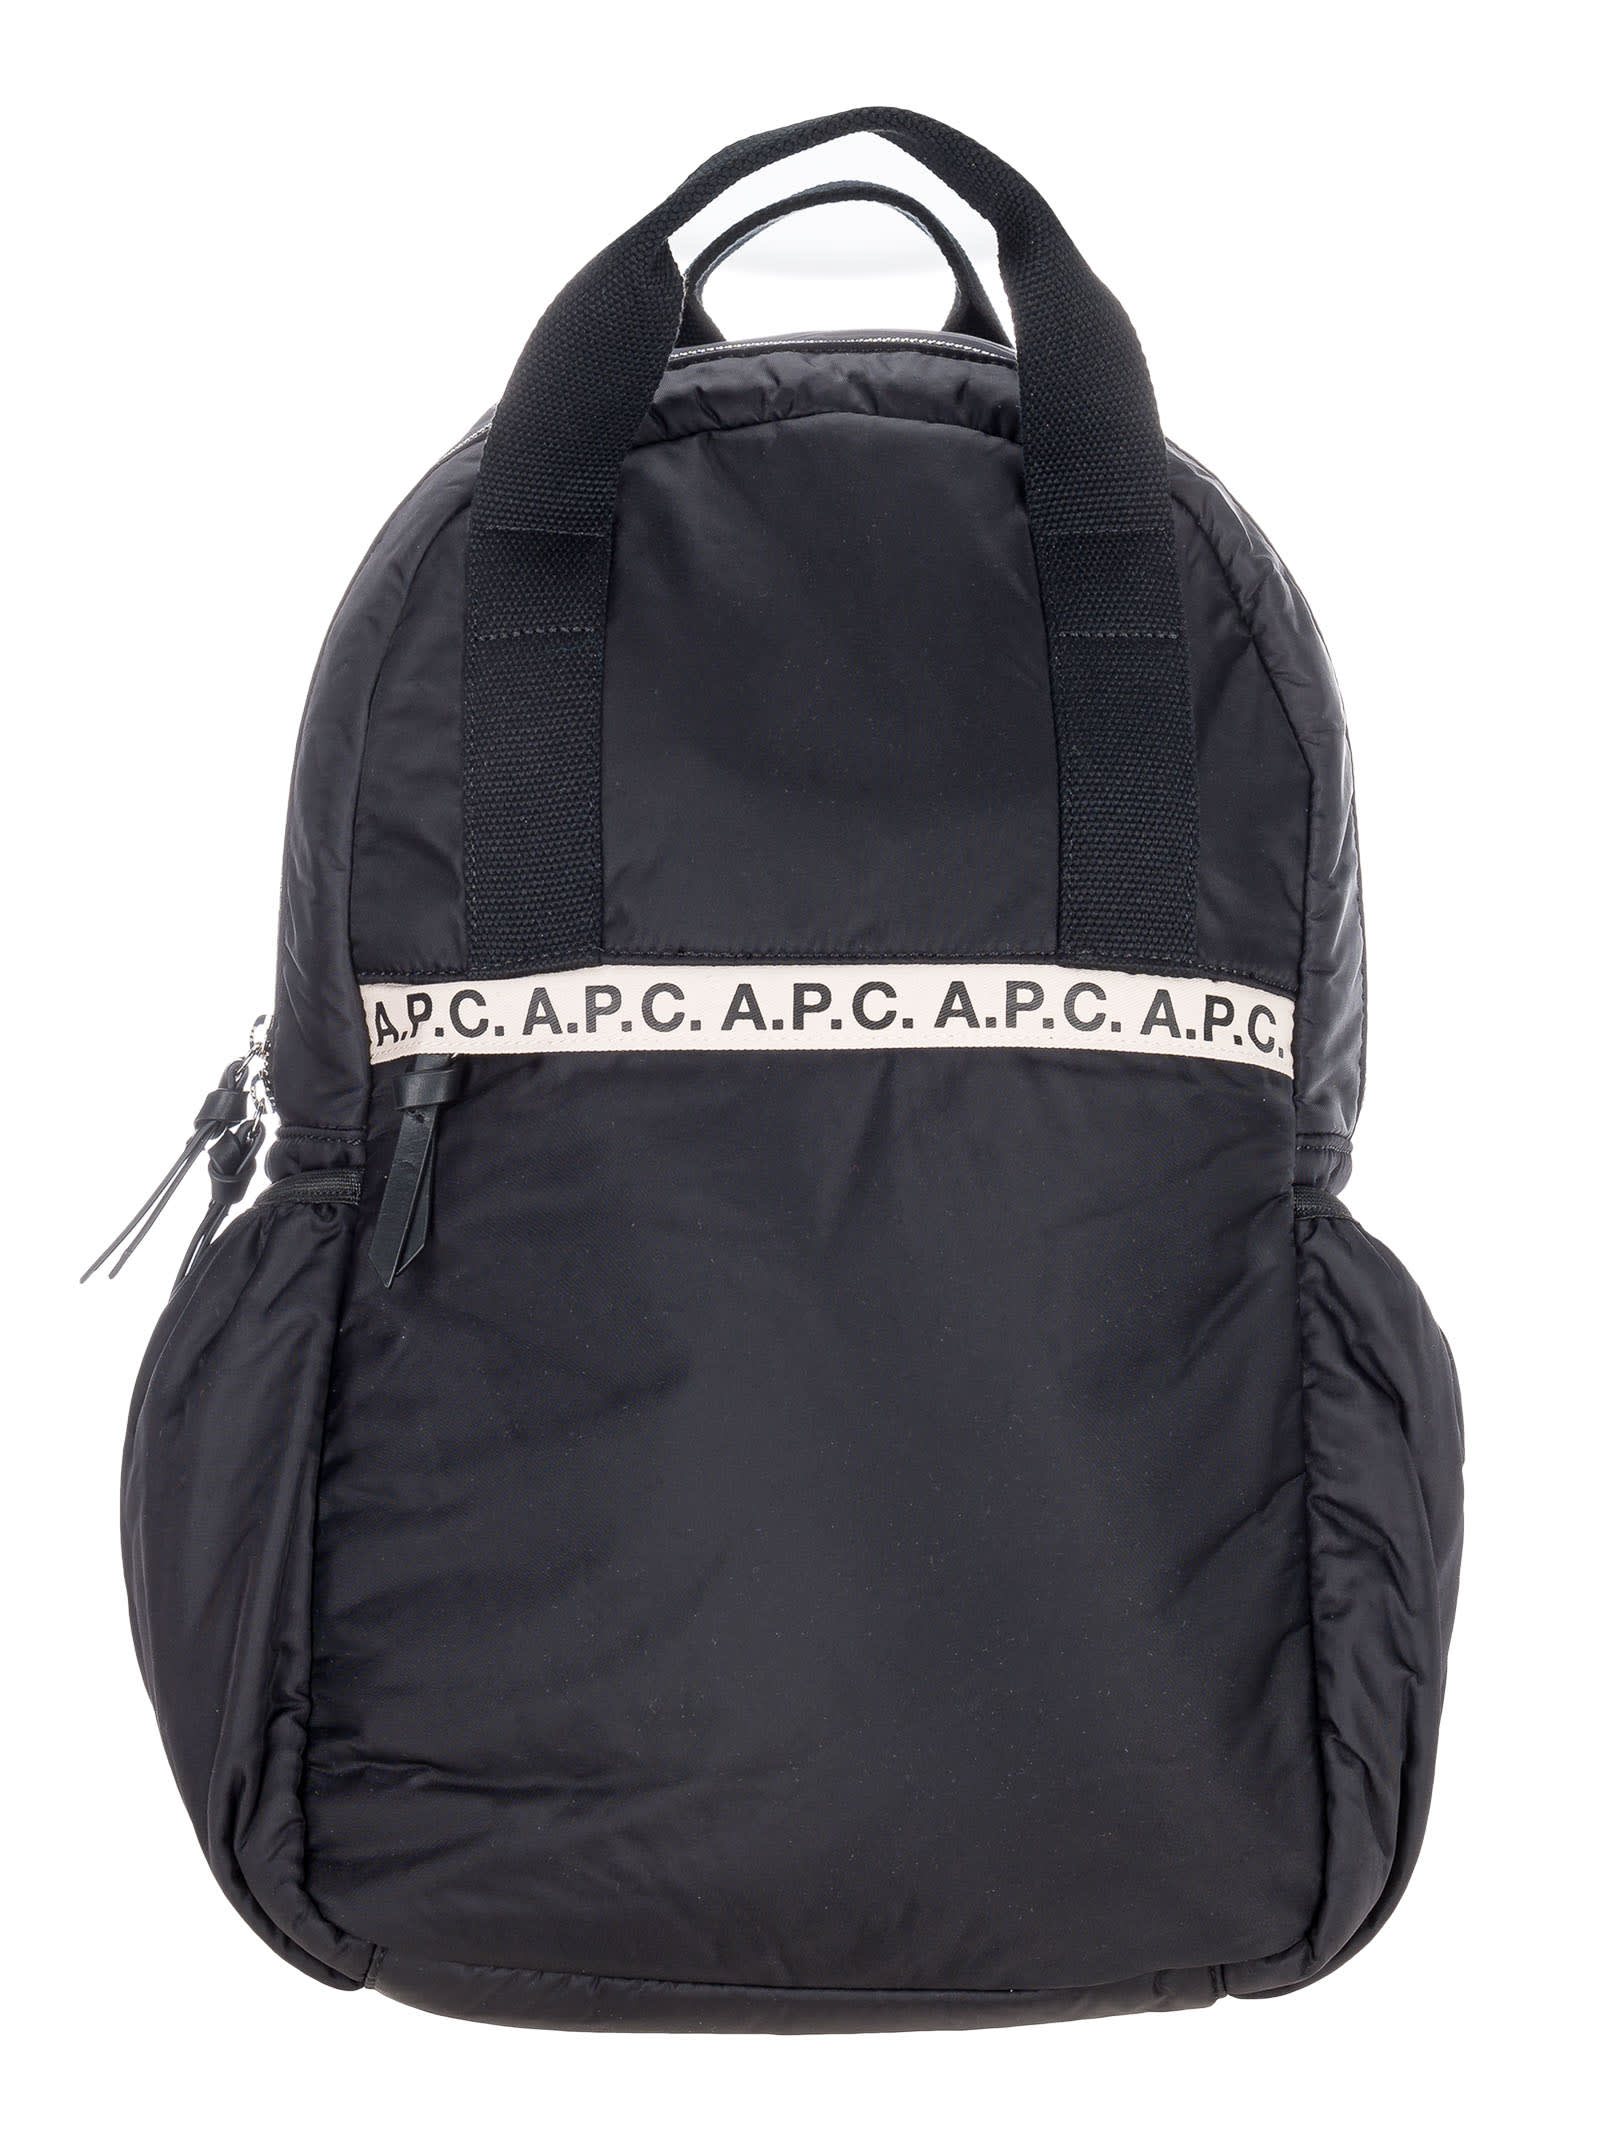 APC A.P.C. NYLON REPEAT BACKPACK BY A.P.C.,H62184PAACLLZZ